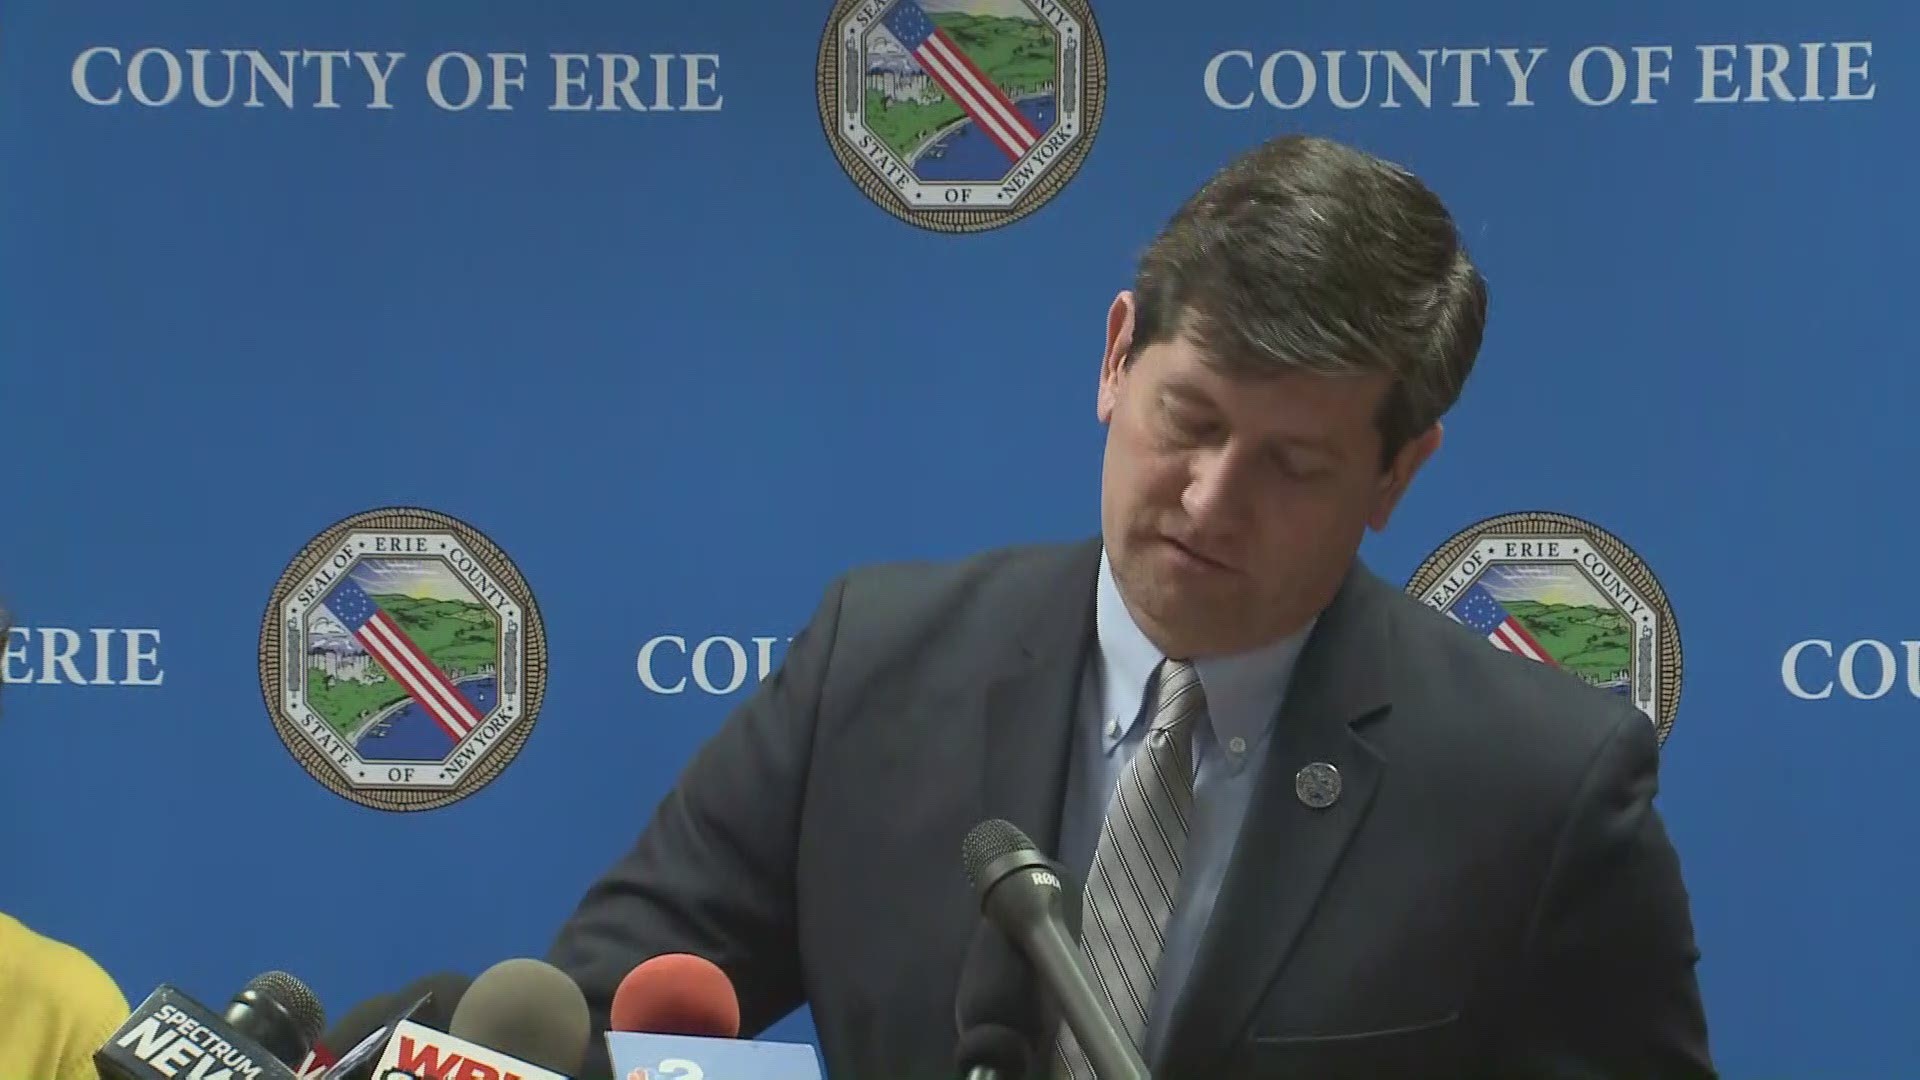 The Erie County Executive made the remark at a news conference on Wednesday afternoon.